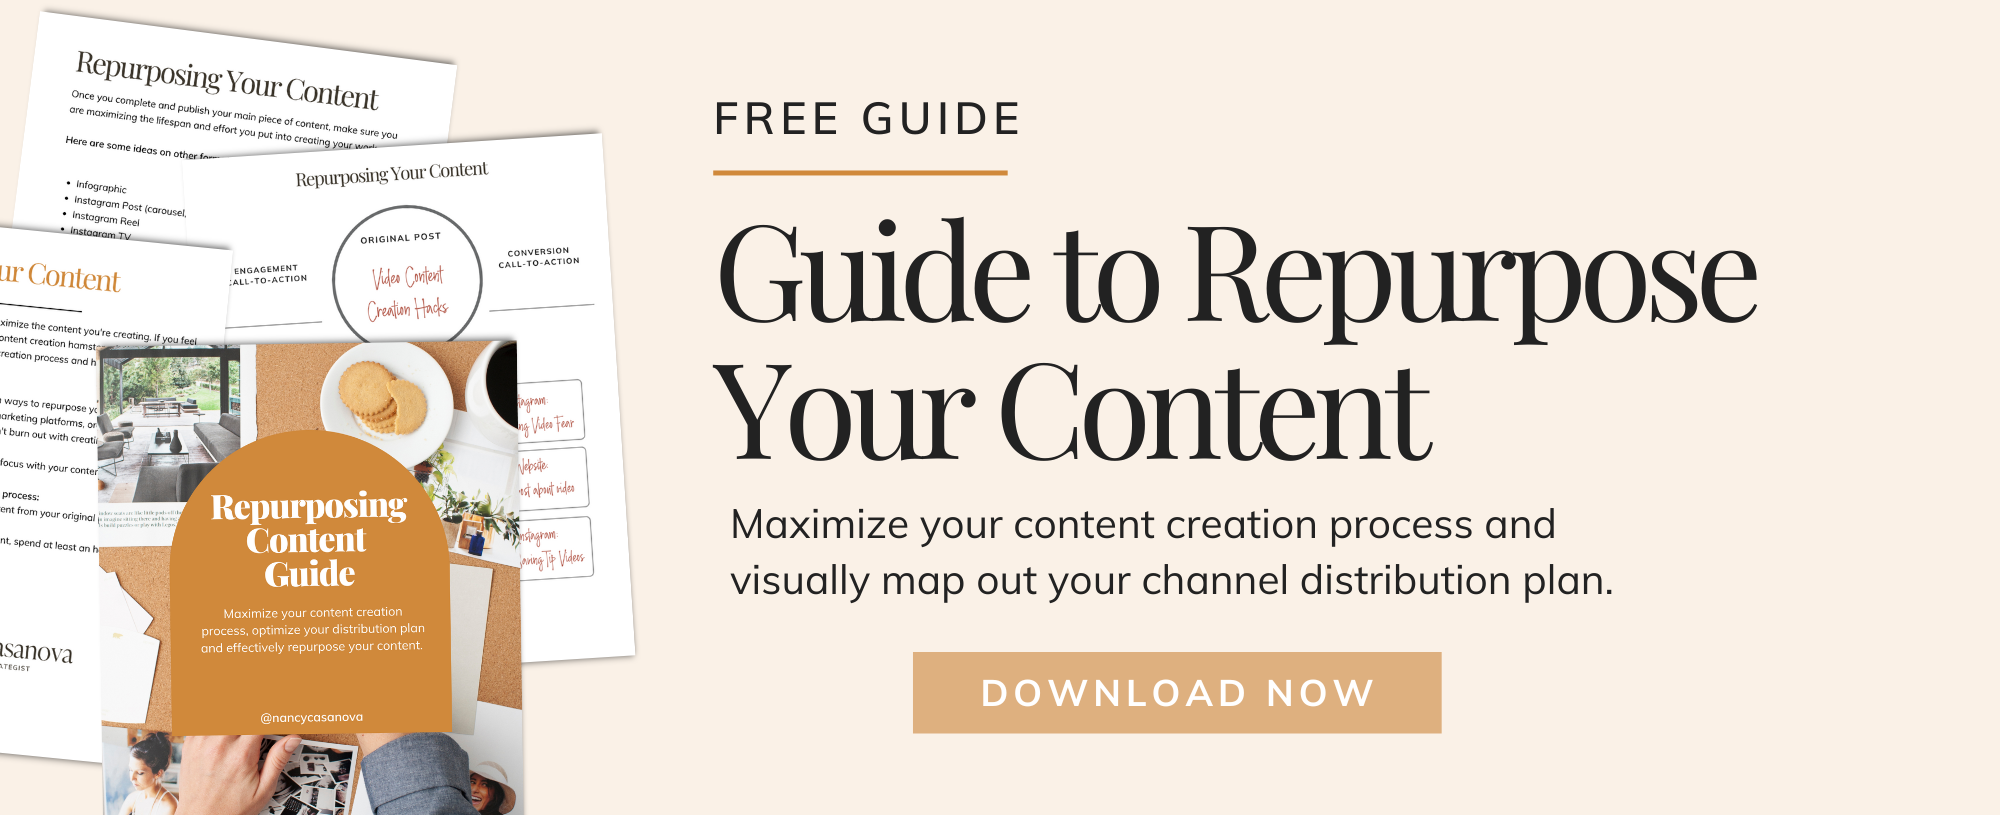 Avoid creating content from scratch and start repurposing your content to maximize your content marketing efforts. Download this Content Repurposing Guide to present your content in a new format and expand its lifespan and reach.